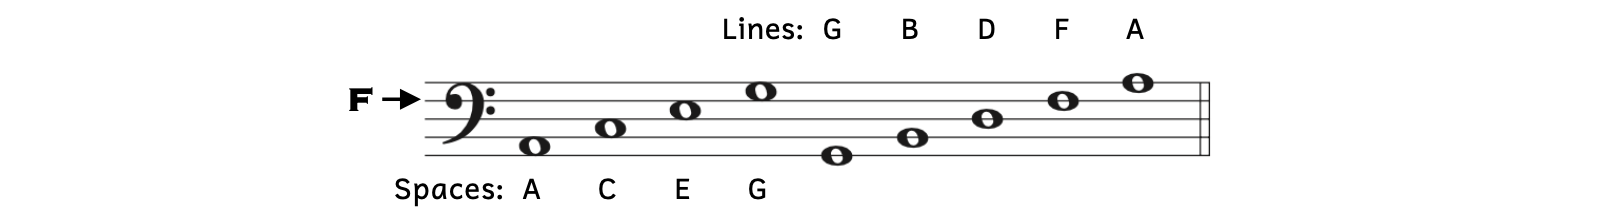 A staff with bass clef is shown. From the bottom up, the spaces contain the pitches A, C, E, and G. The lines contain the pitches G, B, D, F, and A. The fourth line is F, which is also where the bass clef symbol begins.